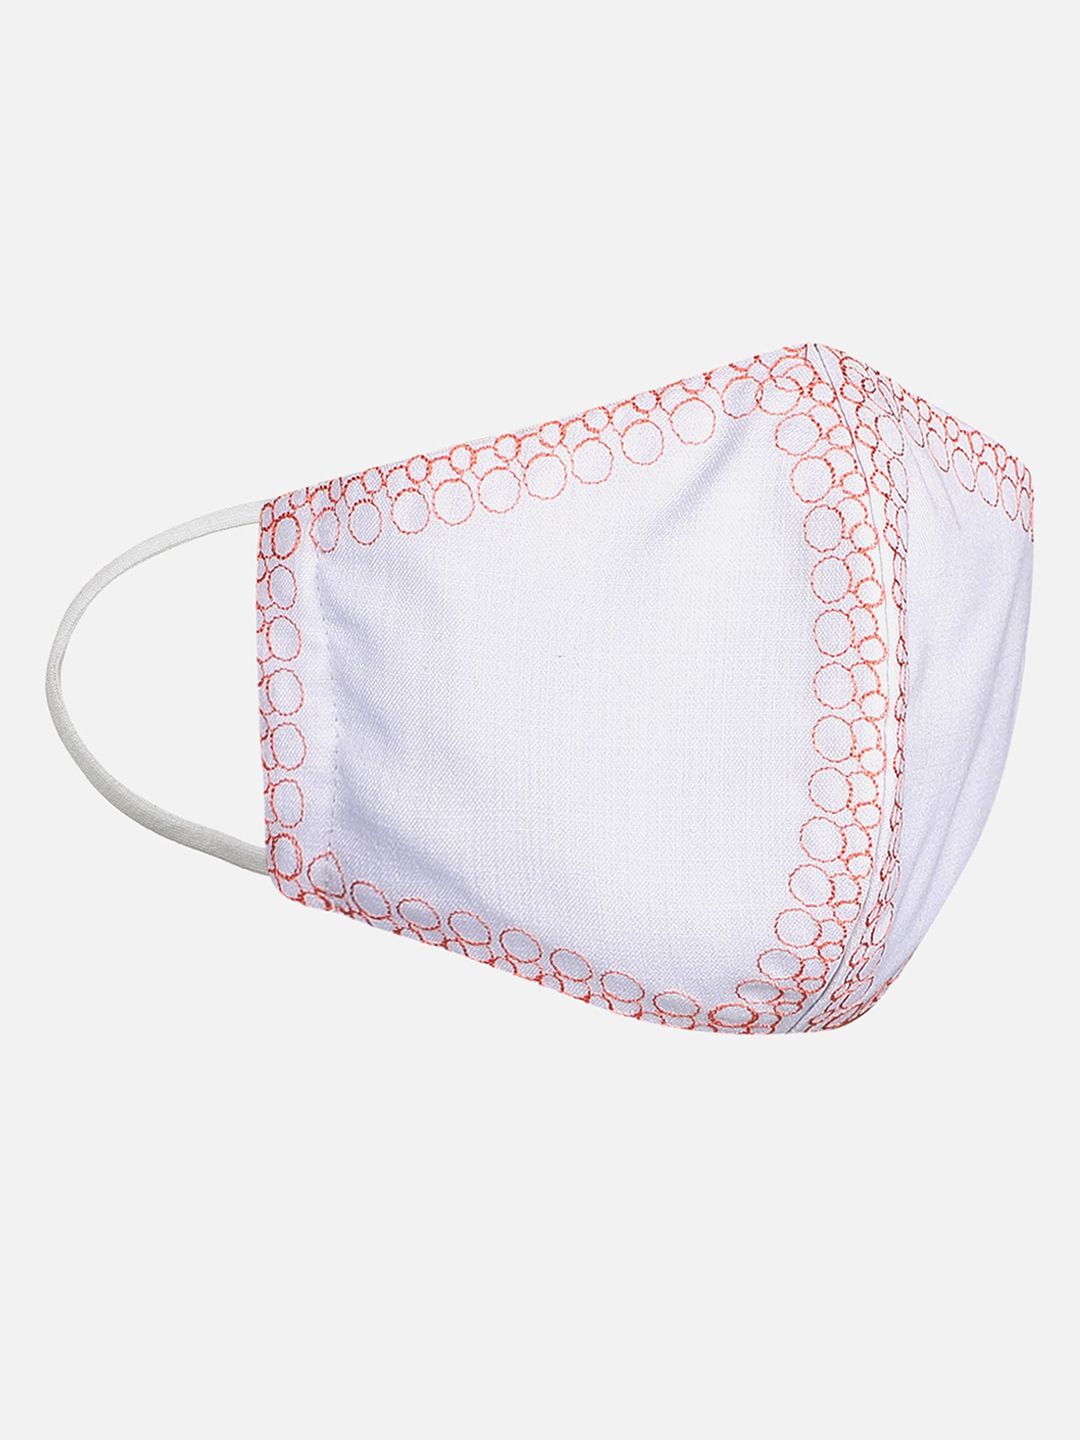 Anekaant Women White & Coral Orange Embroidered 3-Ply Reusable Cloth Mask Price in India